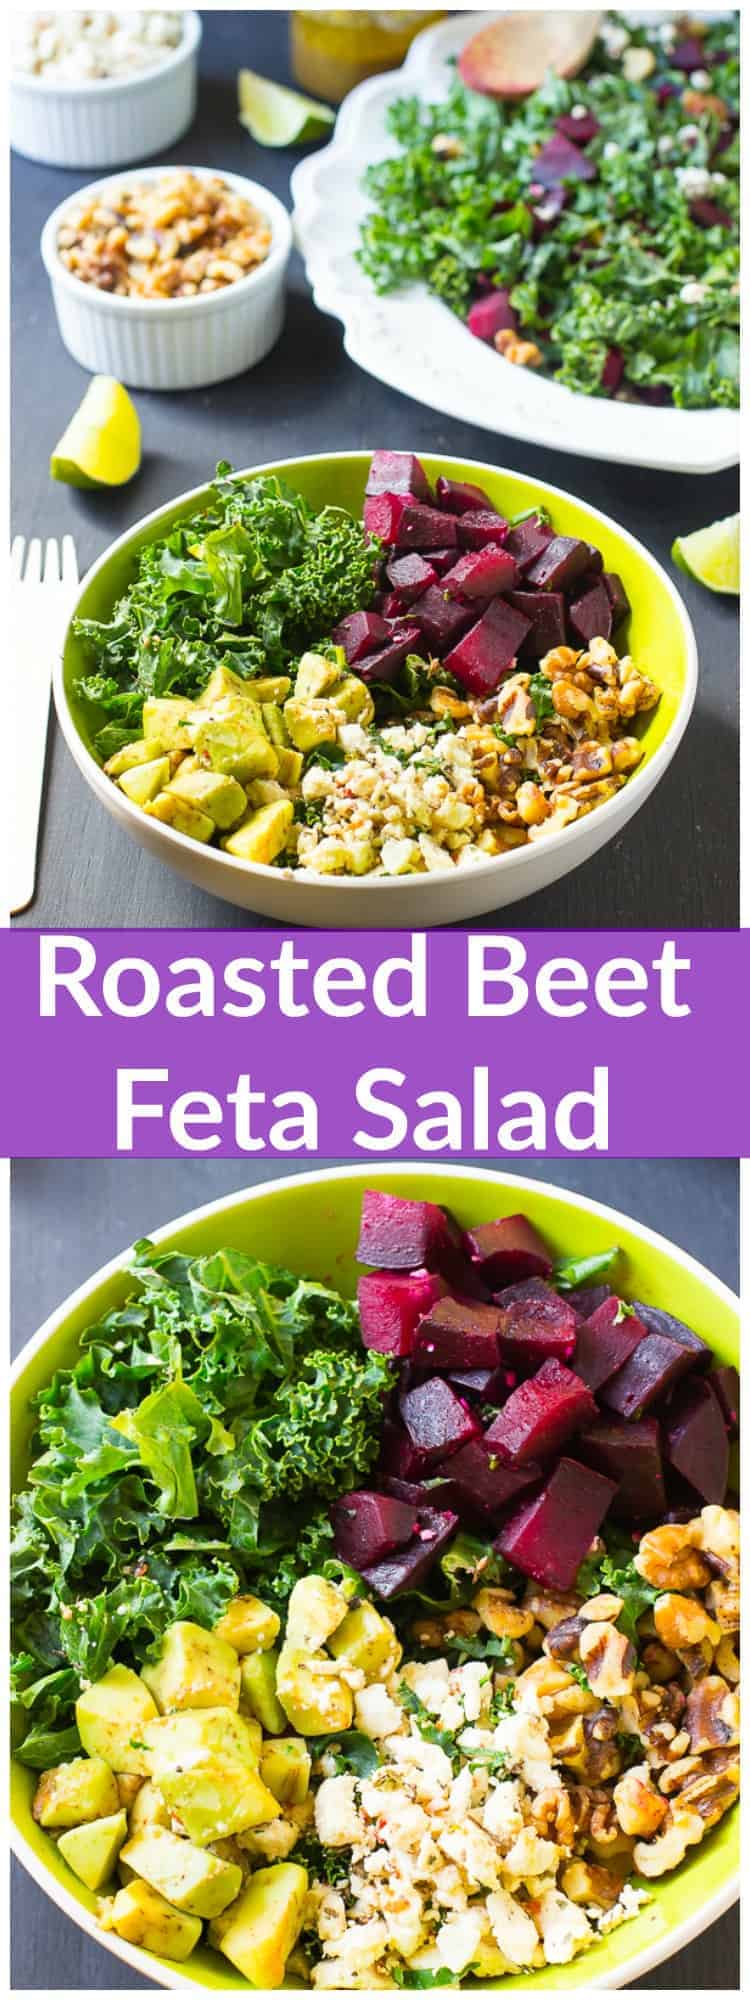 This Roasted Beet Feta Salad is a quick, creamy and delicious salad that can easily serve a crowd. It’s served with a sweet and tangy honey mustard vinaigrette!